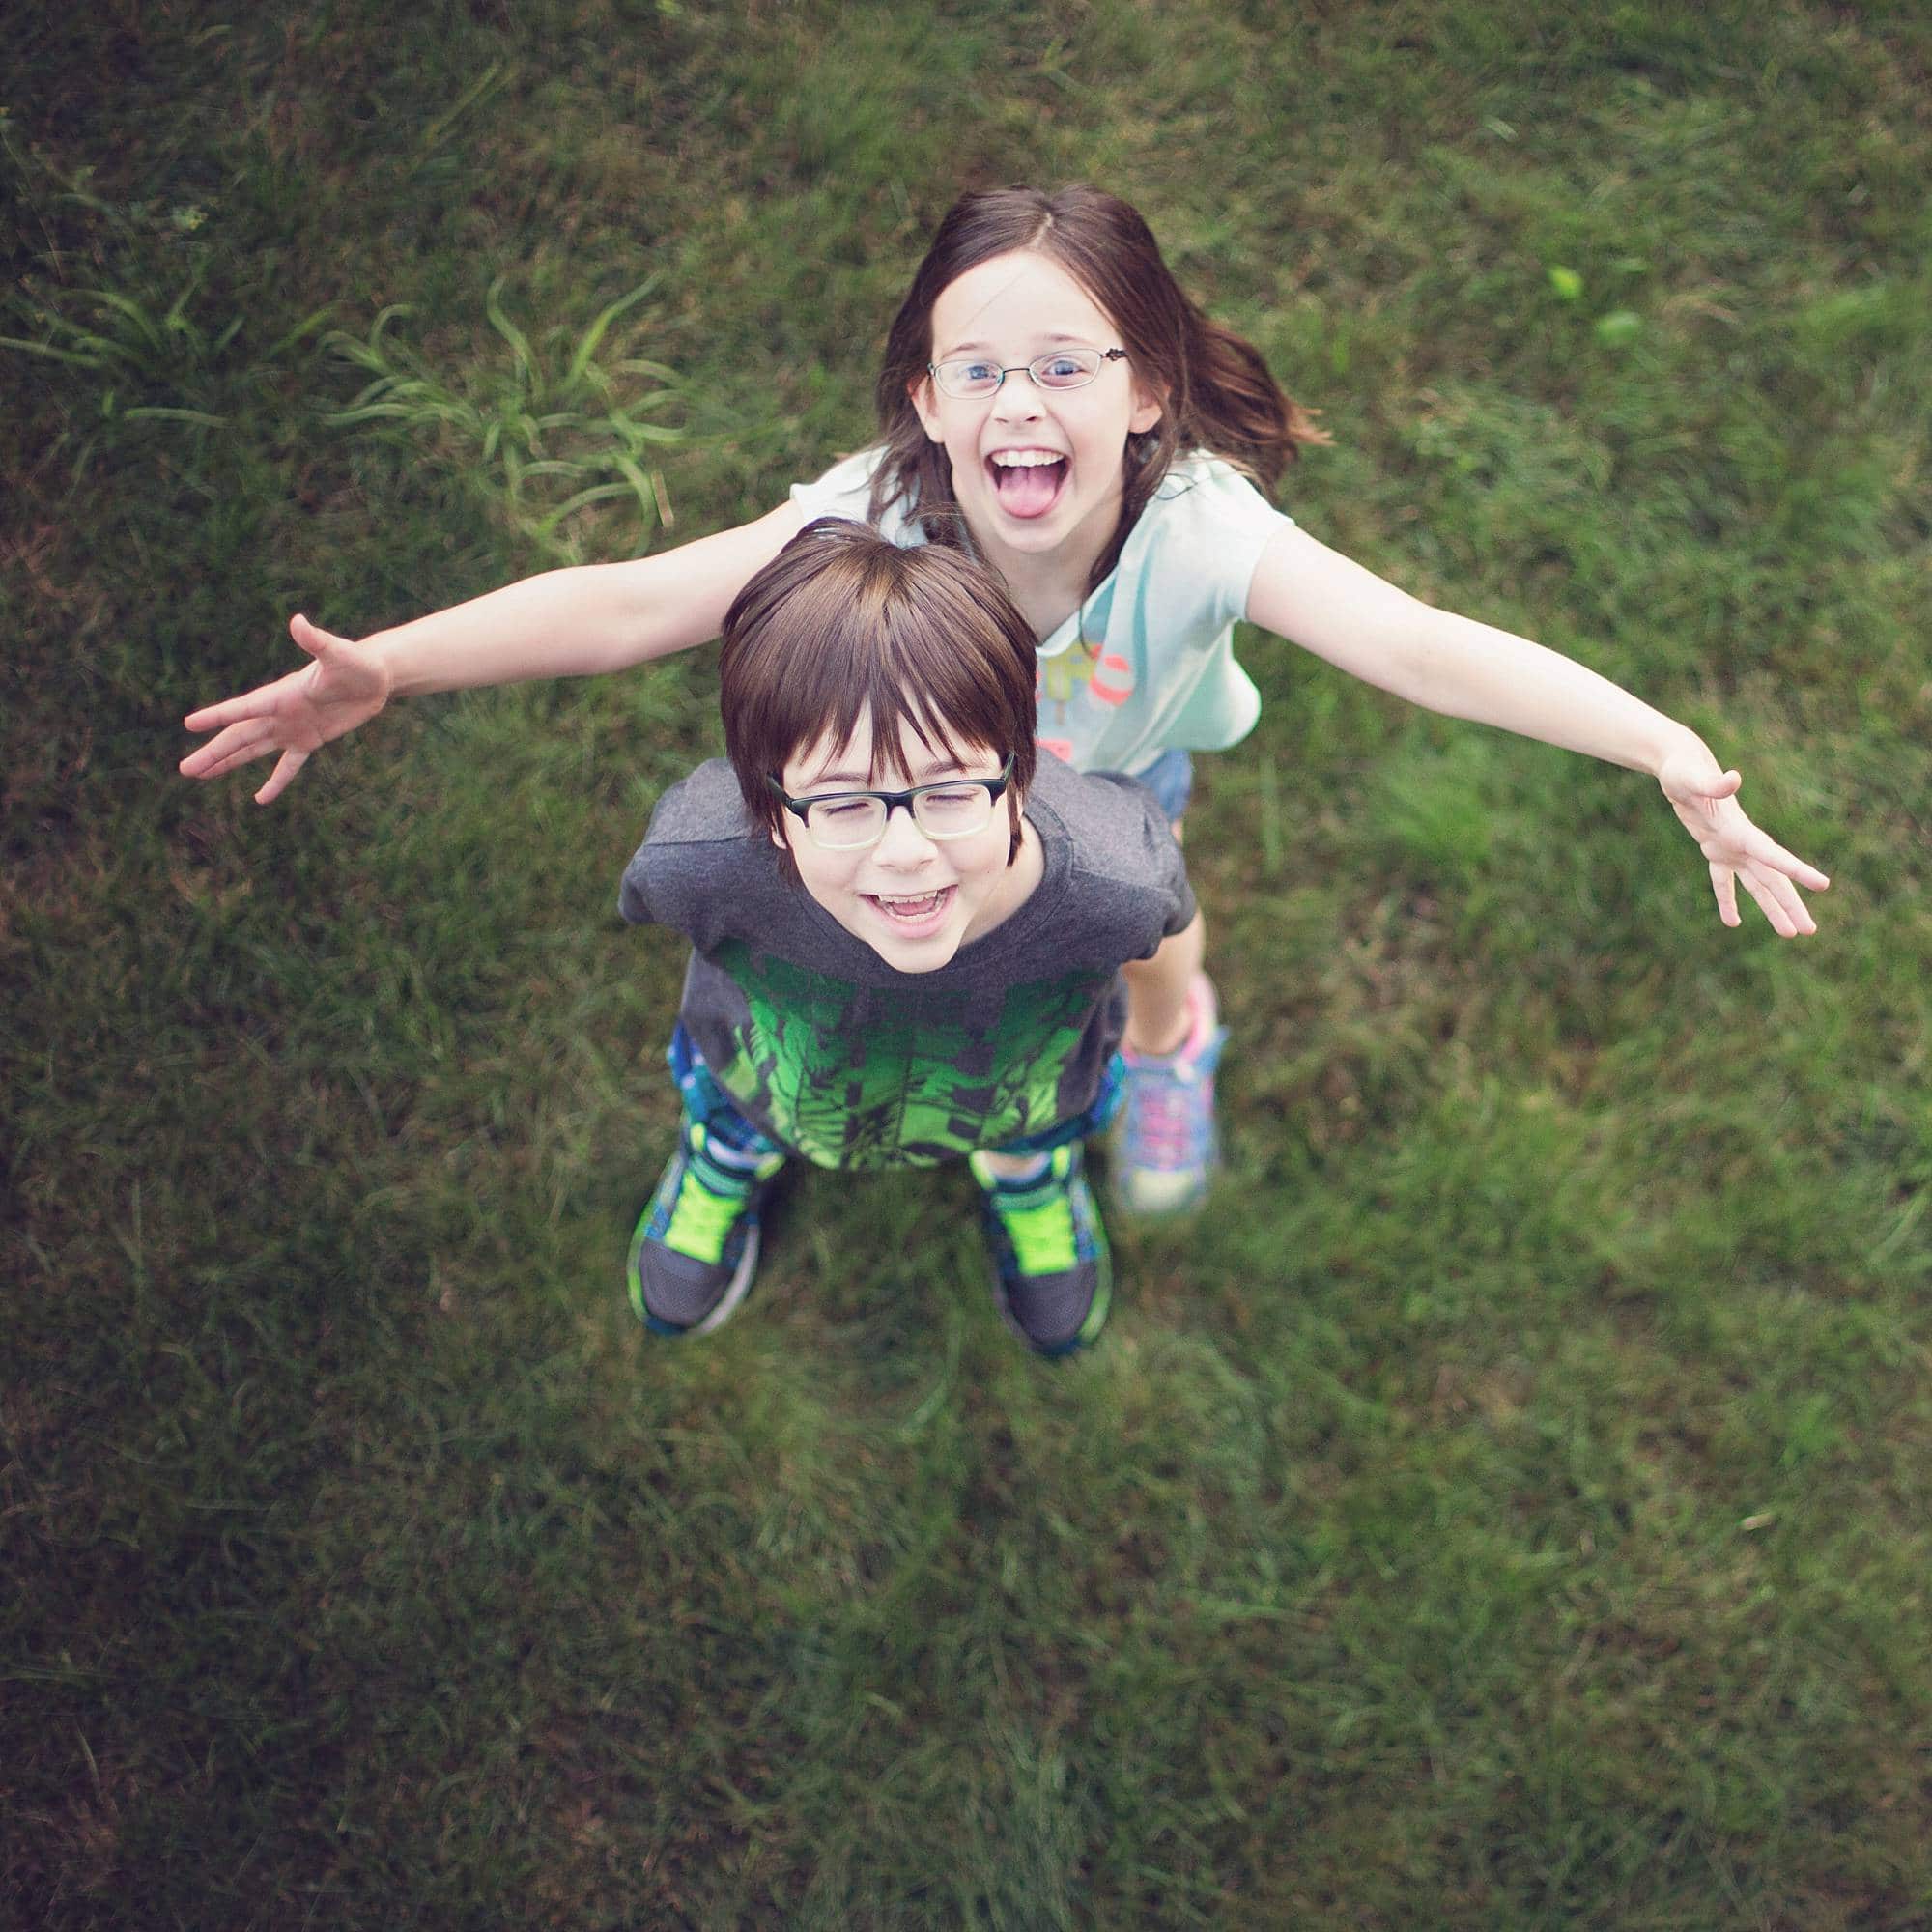 image from above looking down at boy and girl standing in the grass and smiling